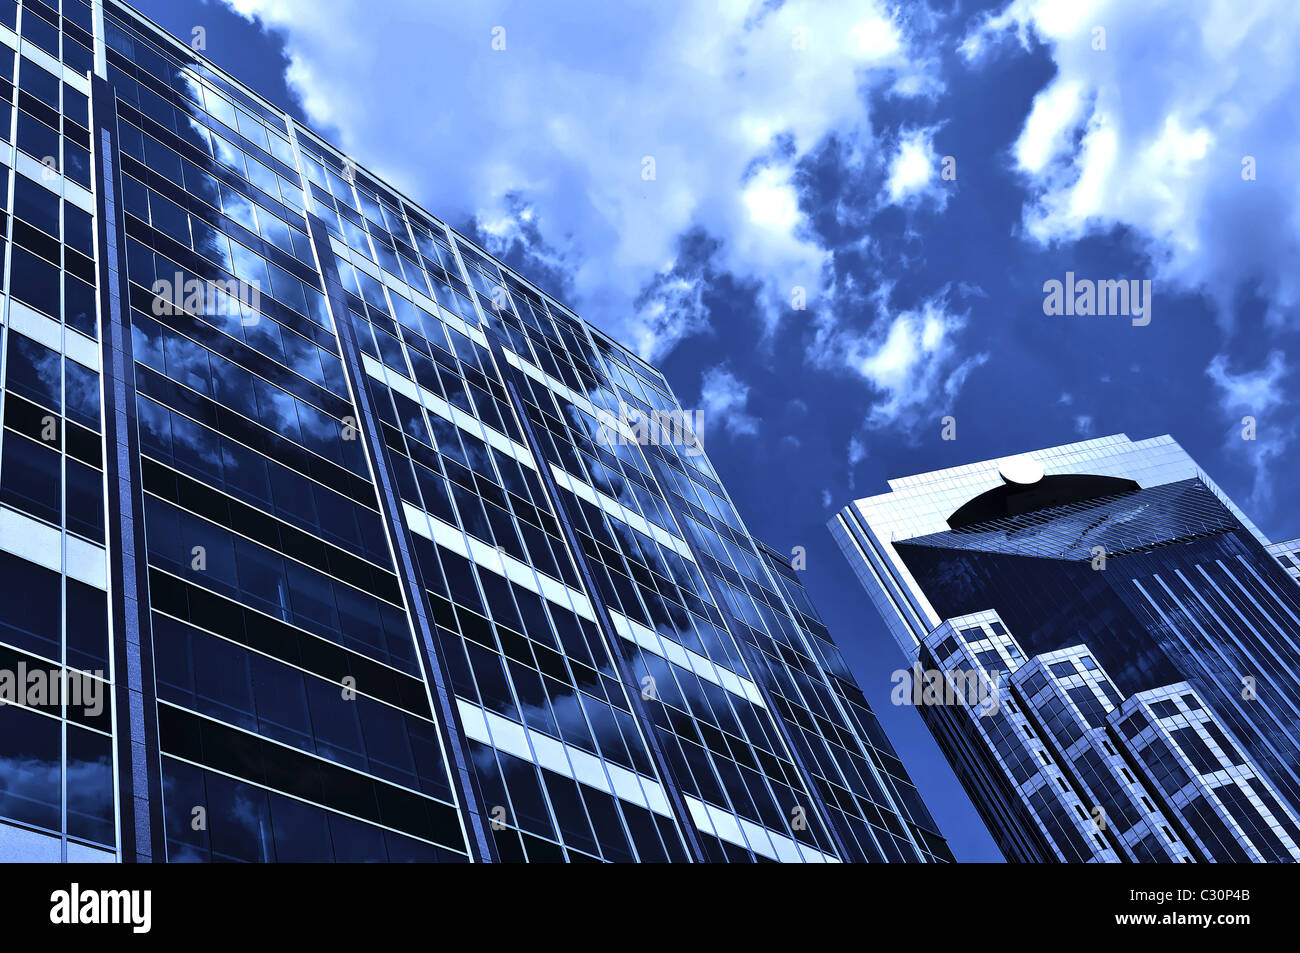 Office buildings and blue sky at twilight in downtown area of major city. Stock Photo